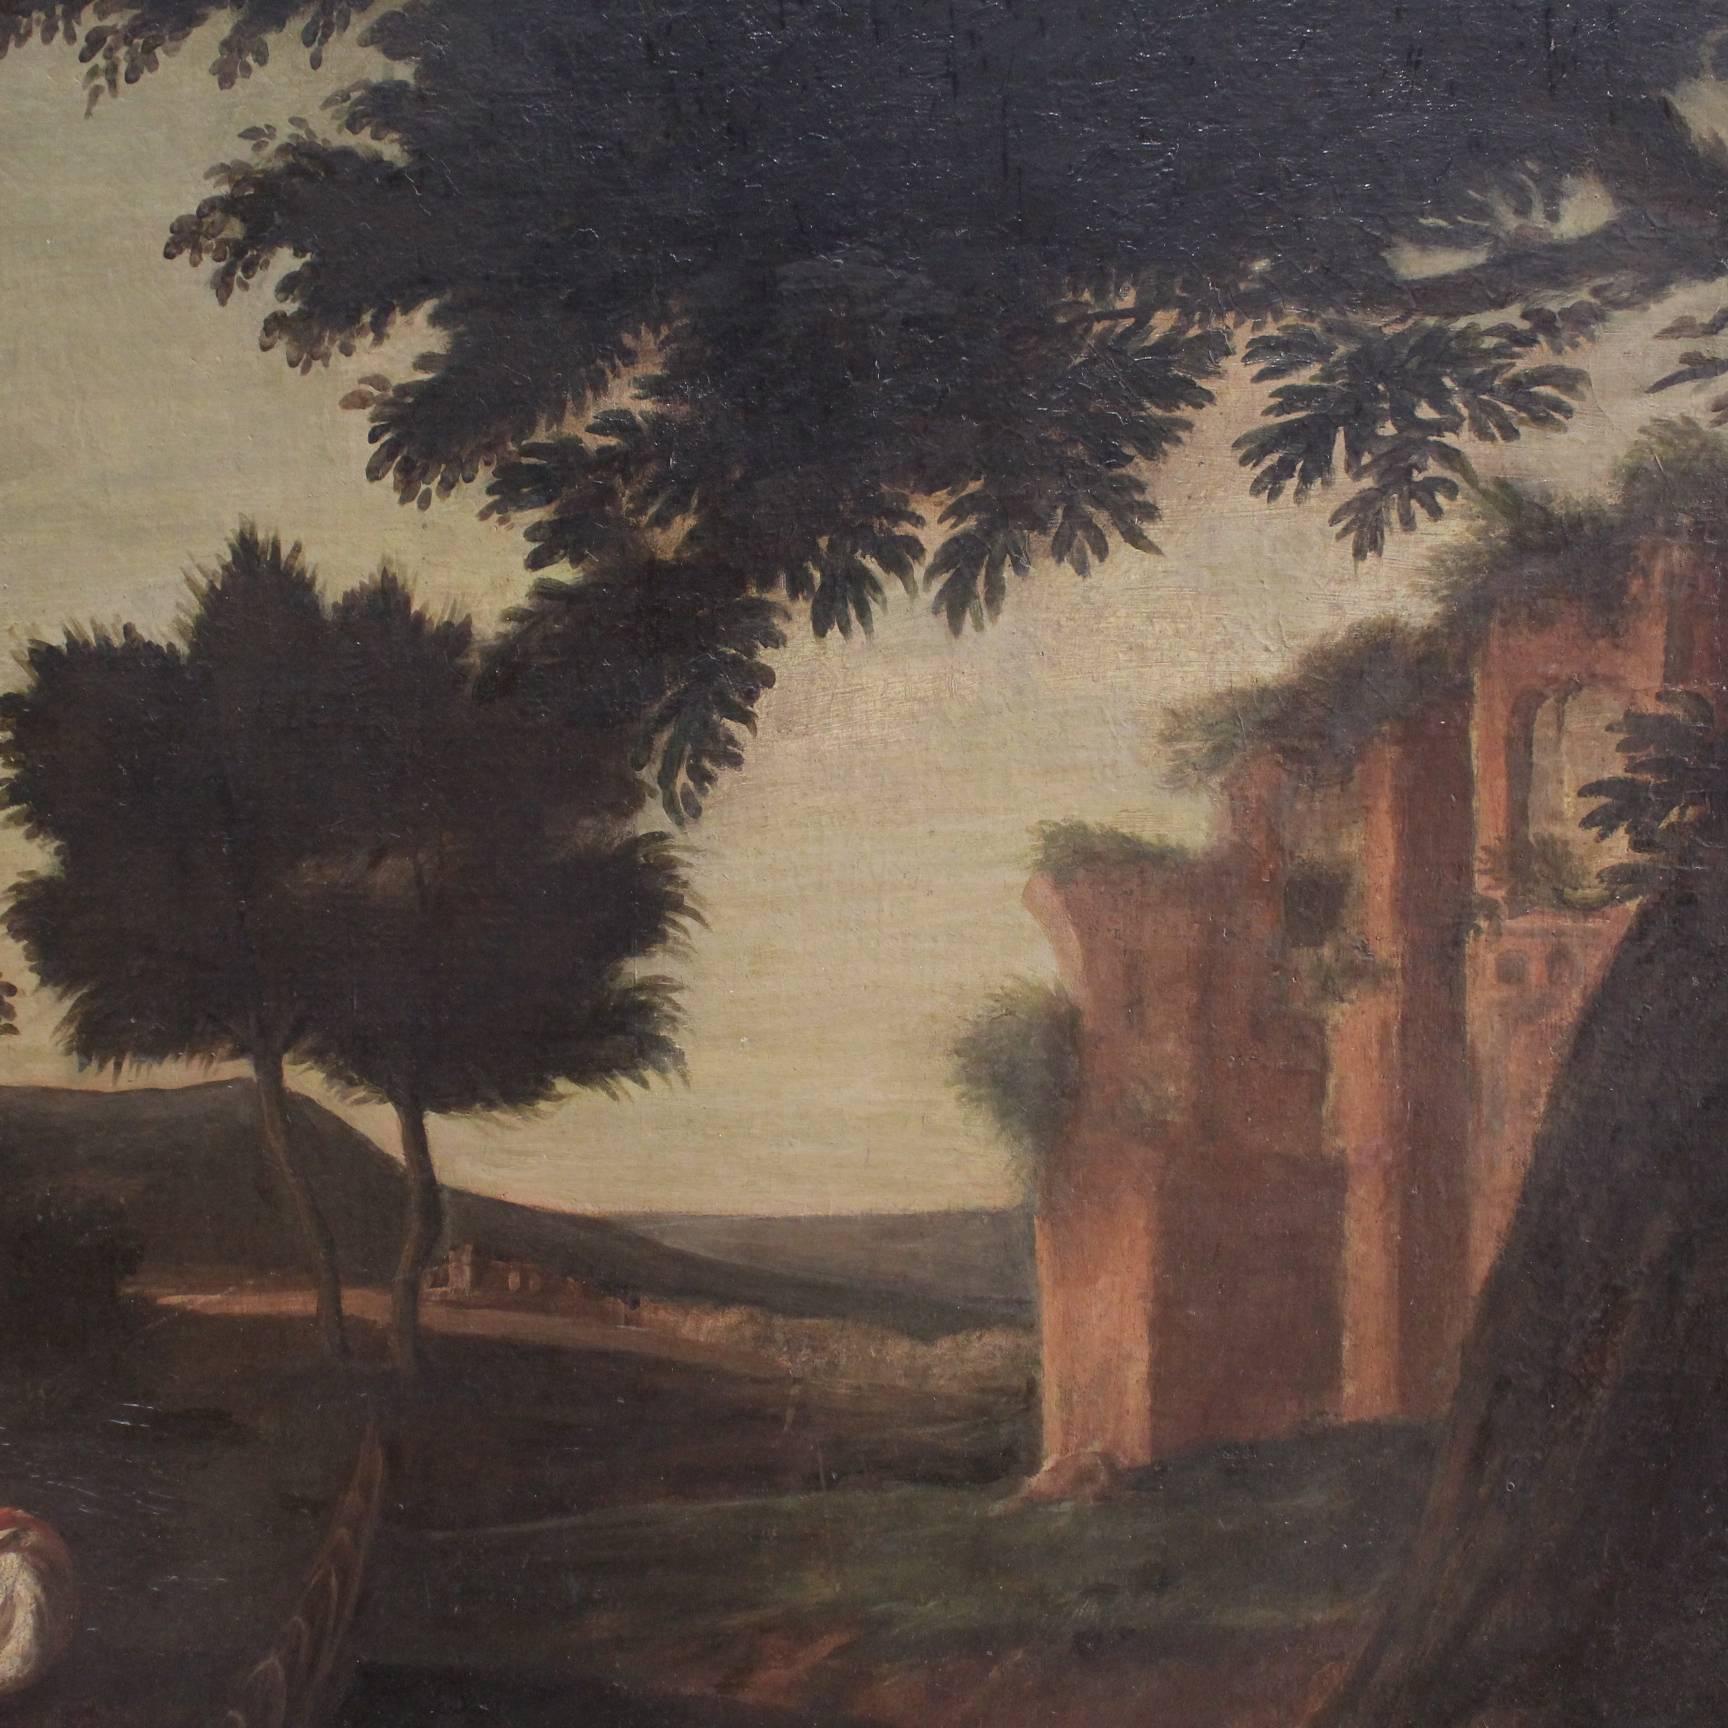 18th Century Landscape With Ruins Painting Oil on Canvas 5